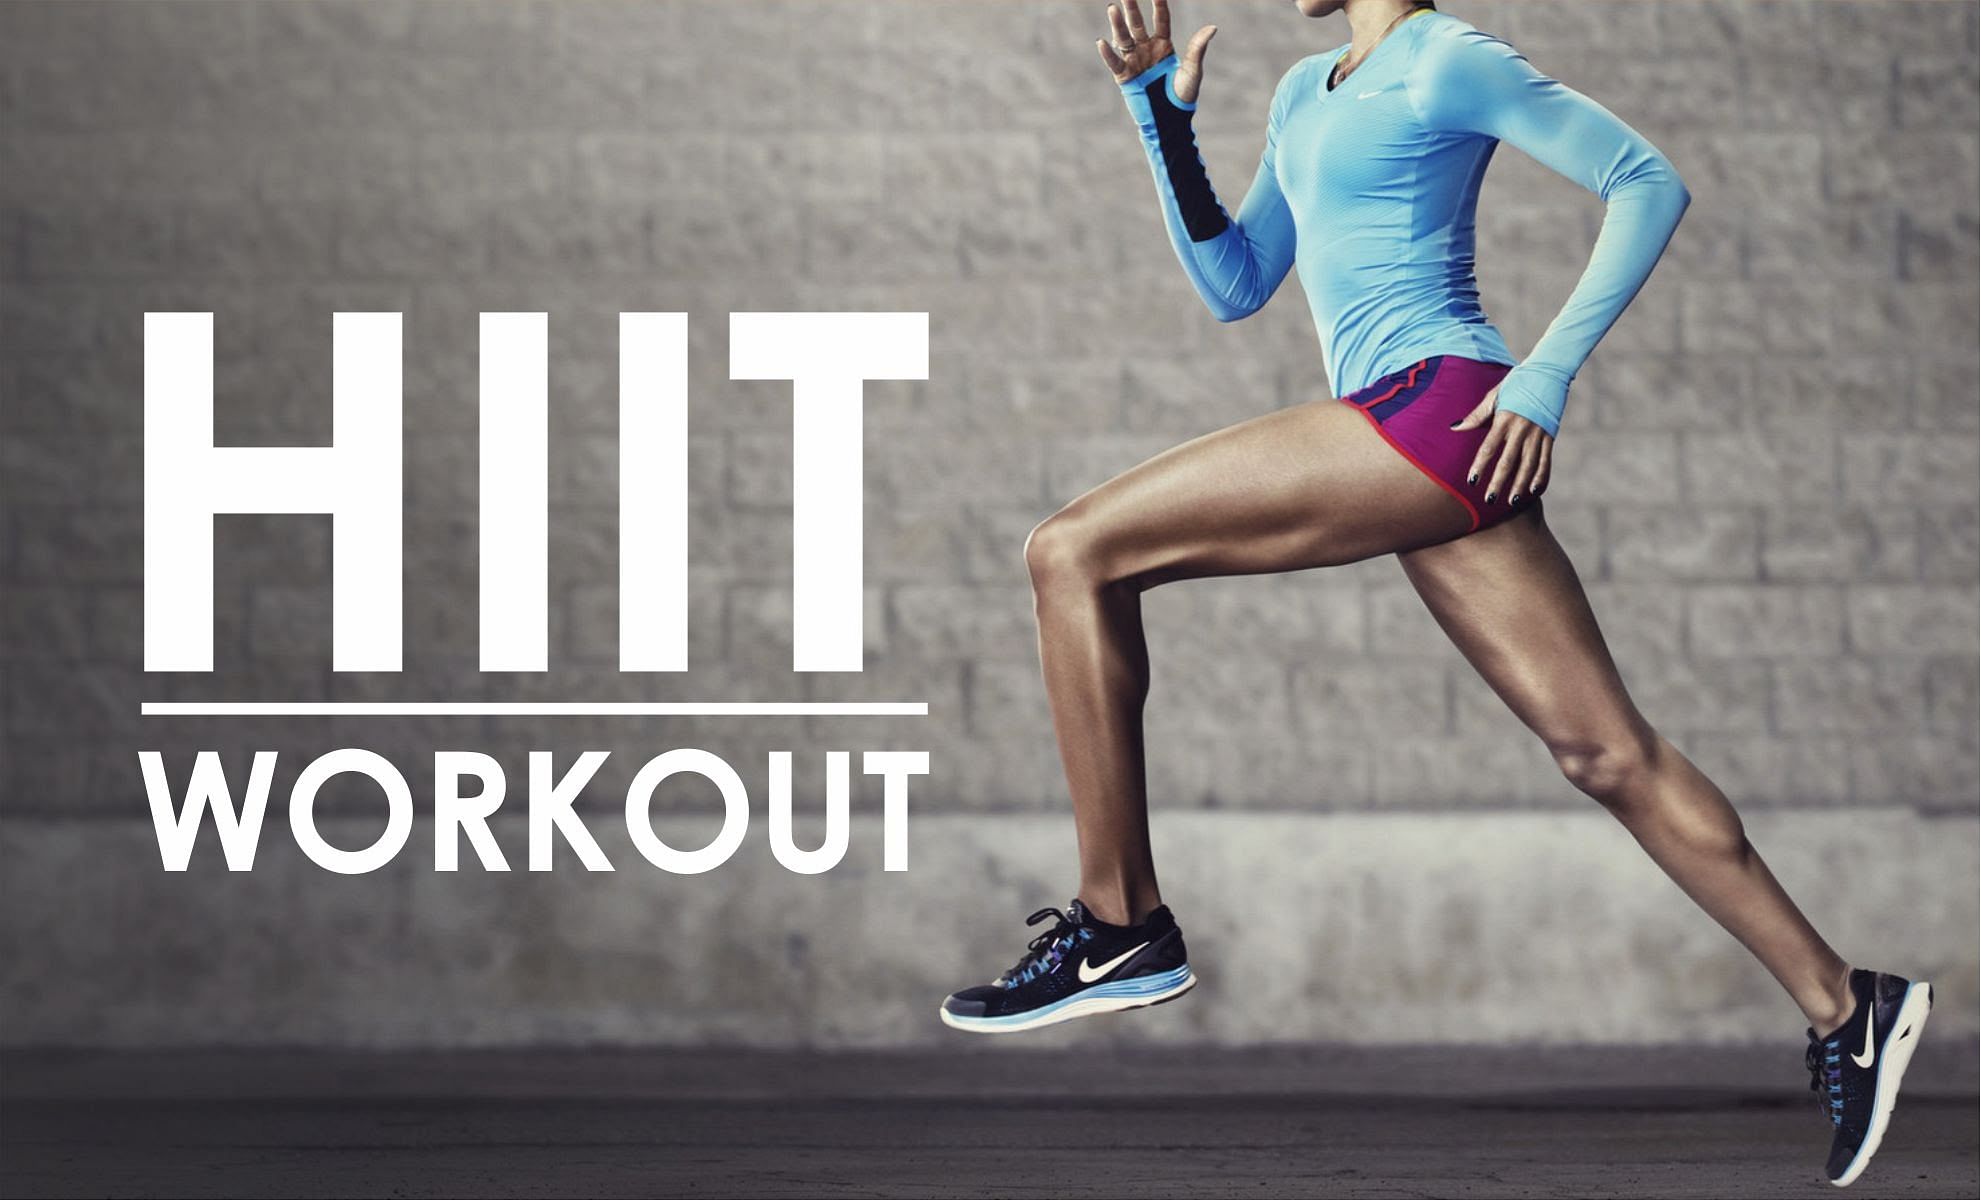 9 HIIT Cardio Workouts To Burn Fat From Hips, Thighs & Belly